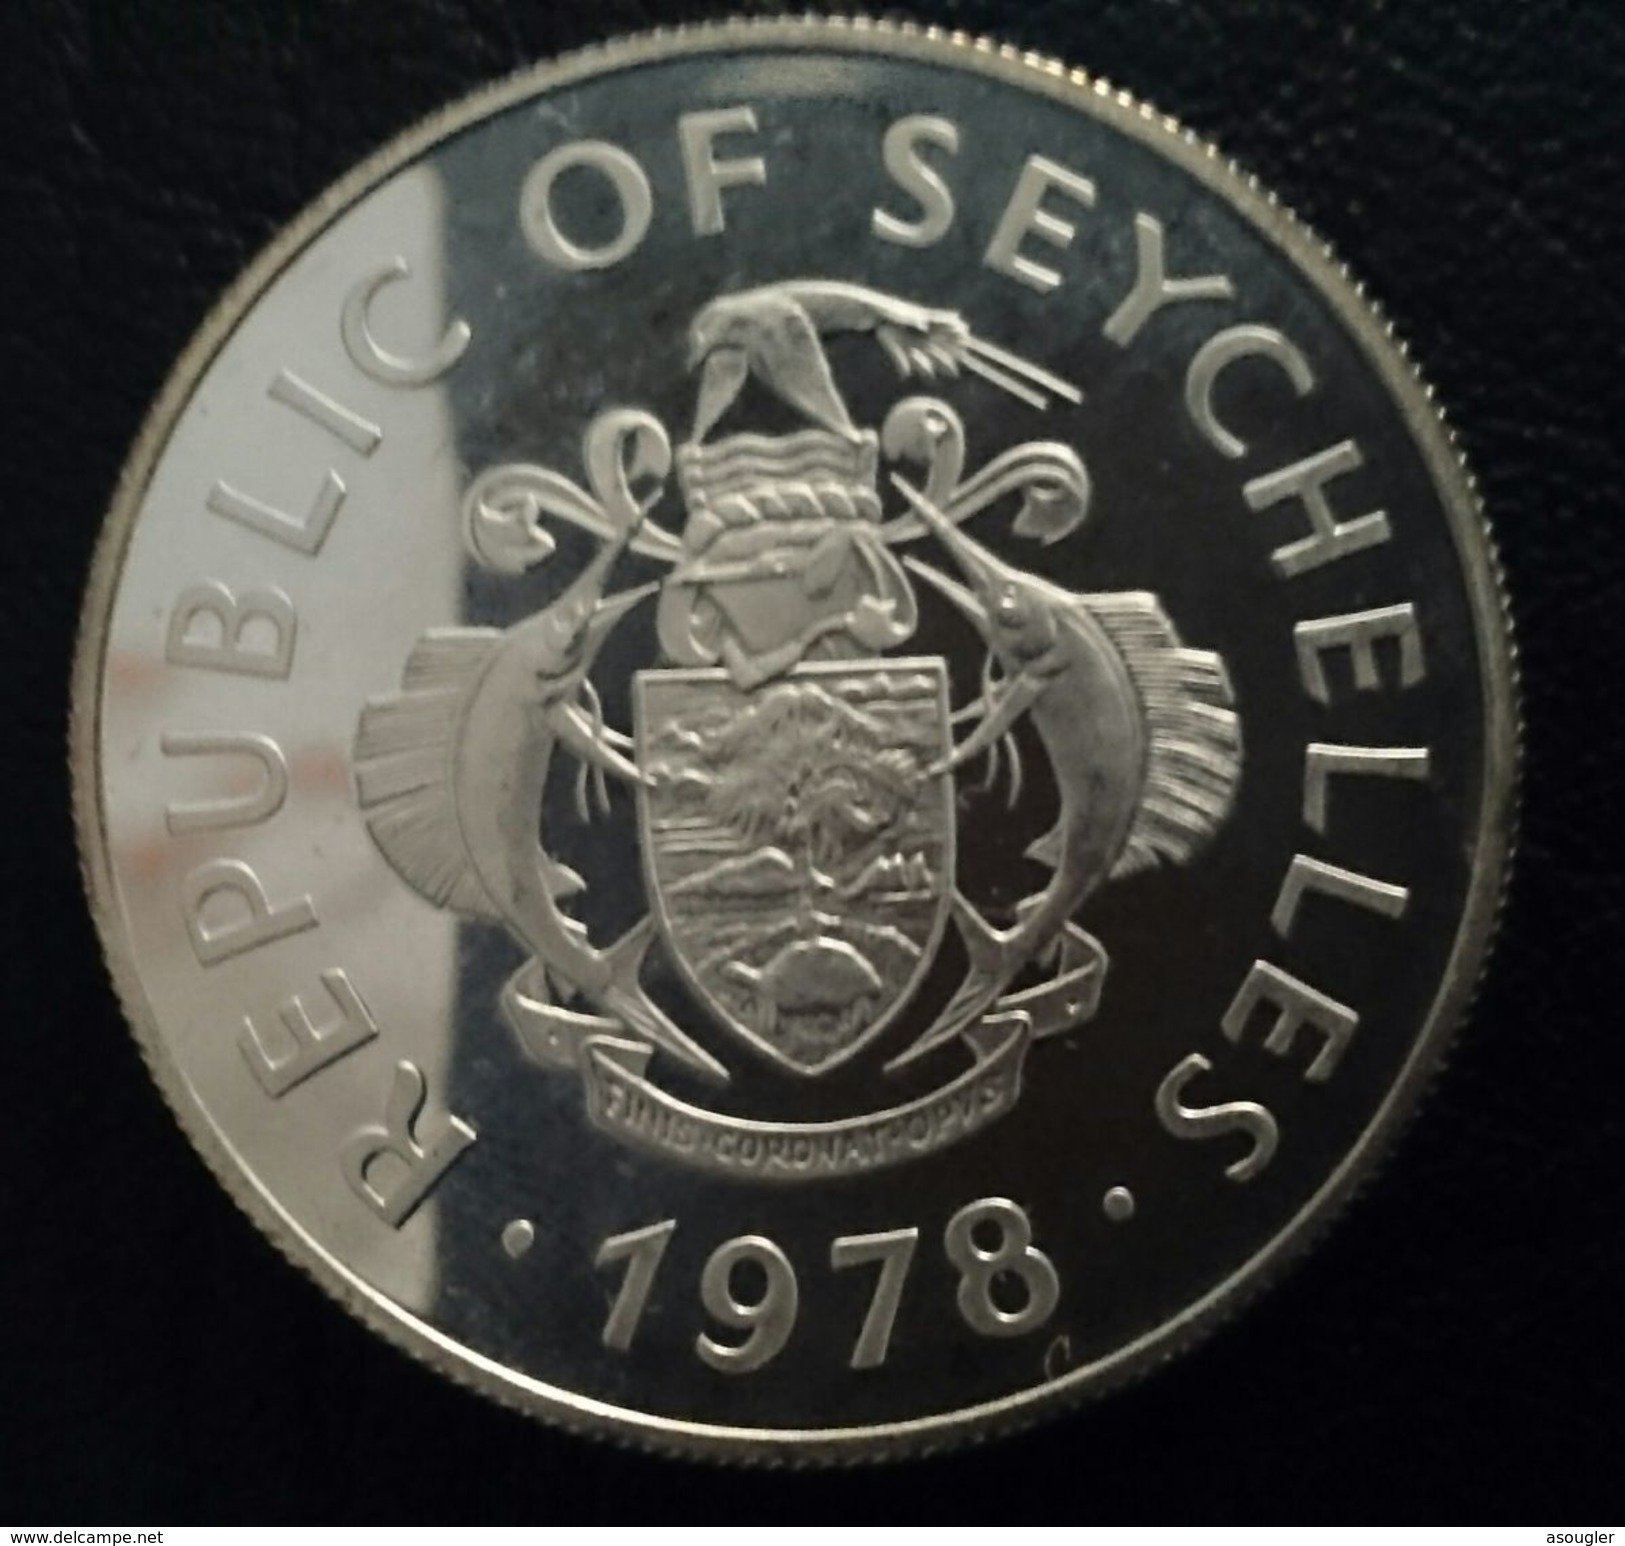 SEYCHELLES 50 RUPEES 1978 SILVER PROOF "Conservation" Free Shipping Via Registered Air Mail - Seychelles